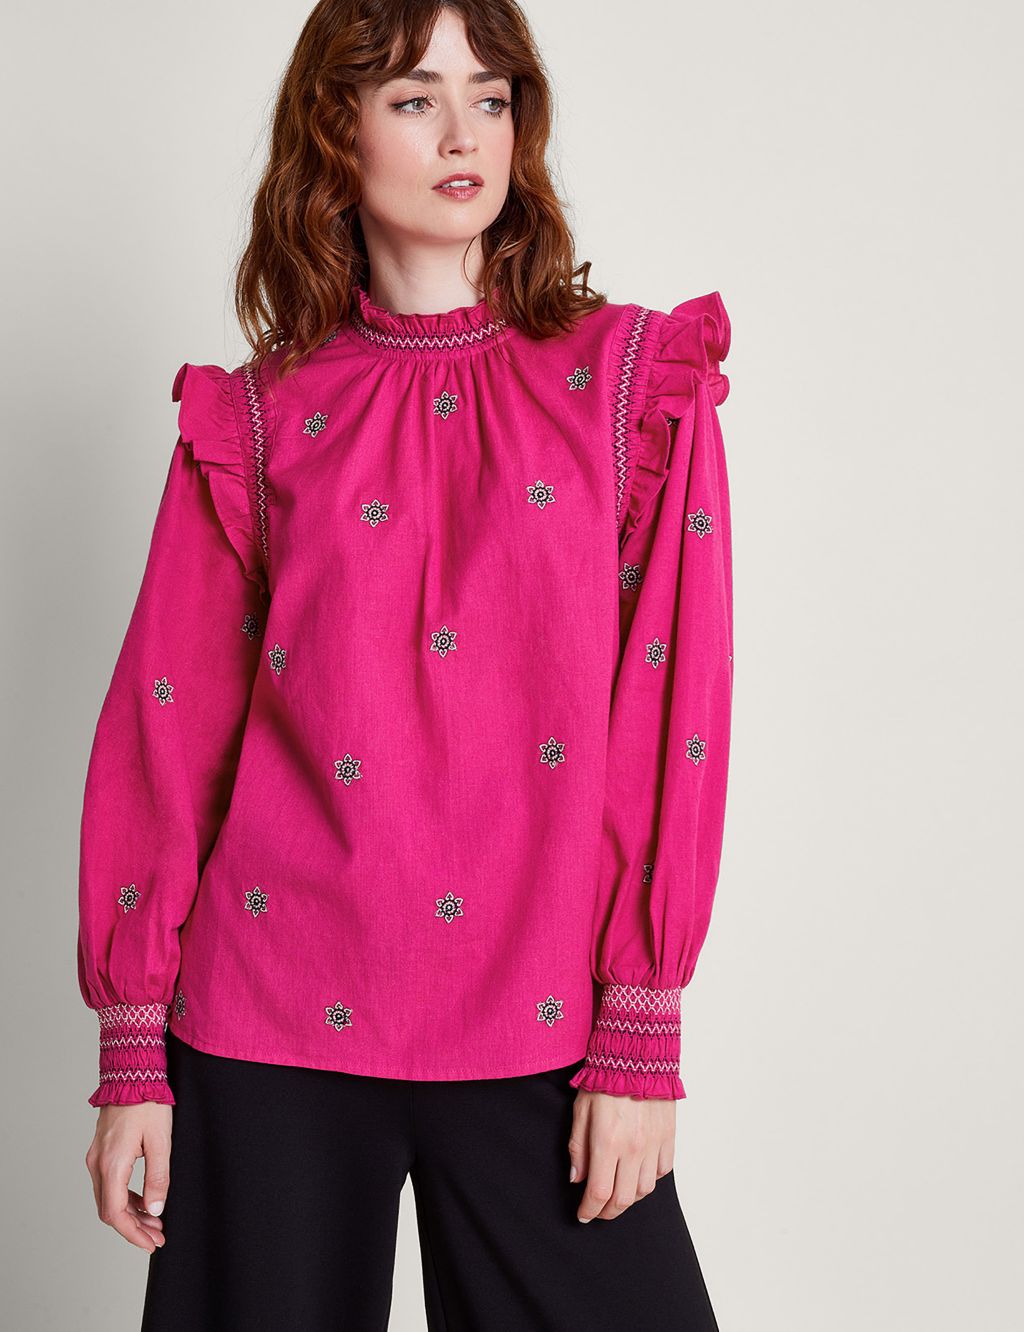 Pure Cotton Embroidered High Neck Blouse image 1